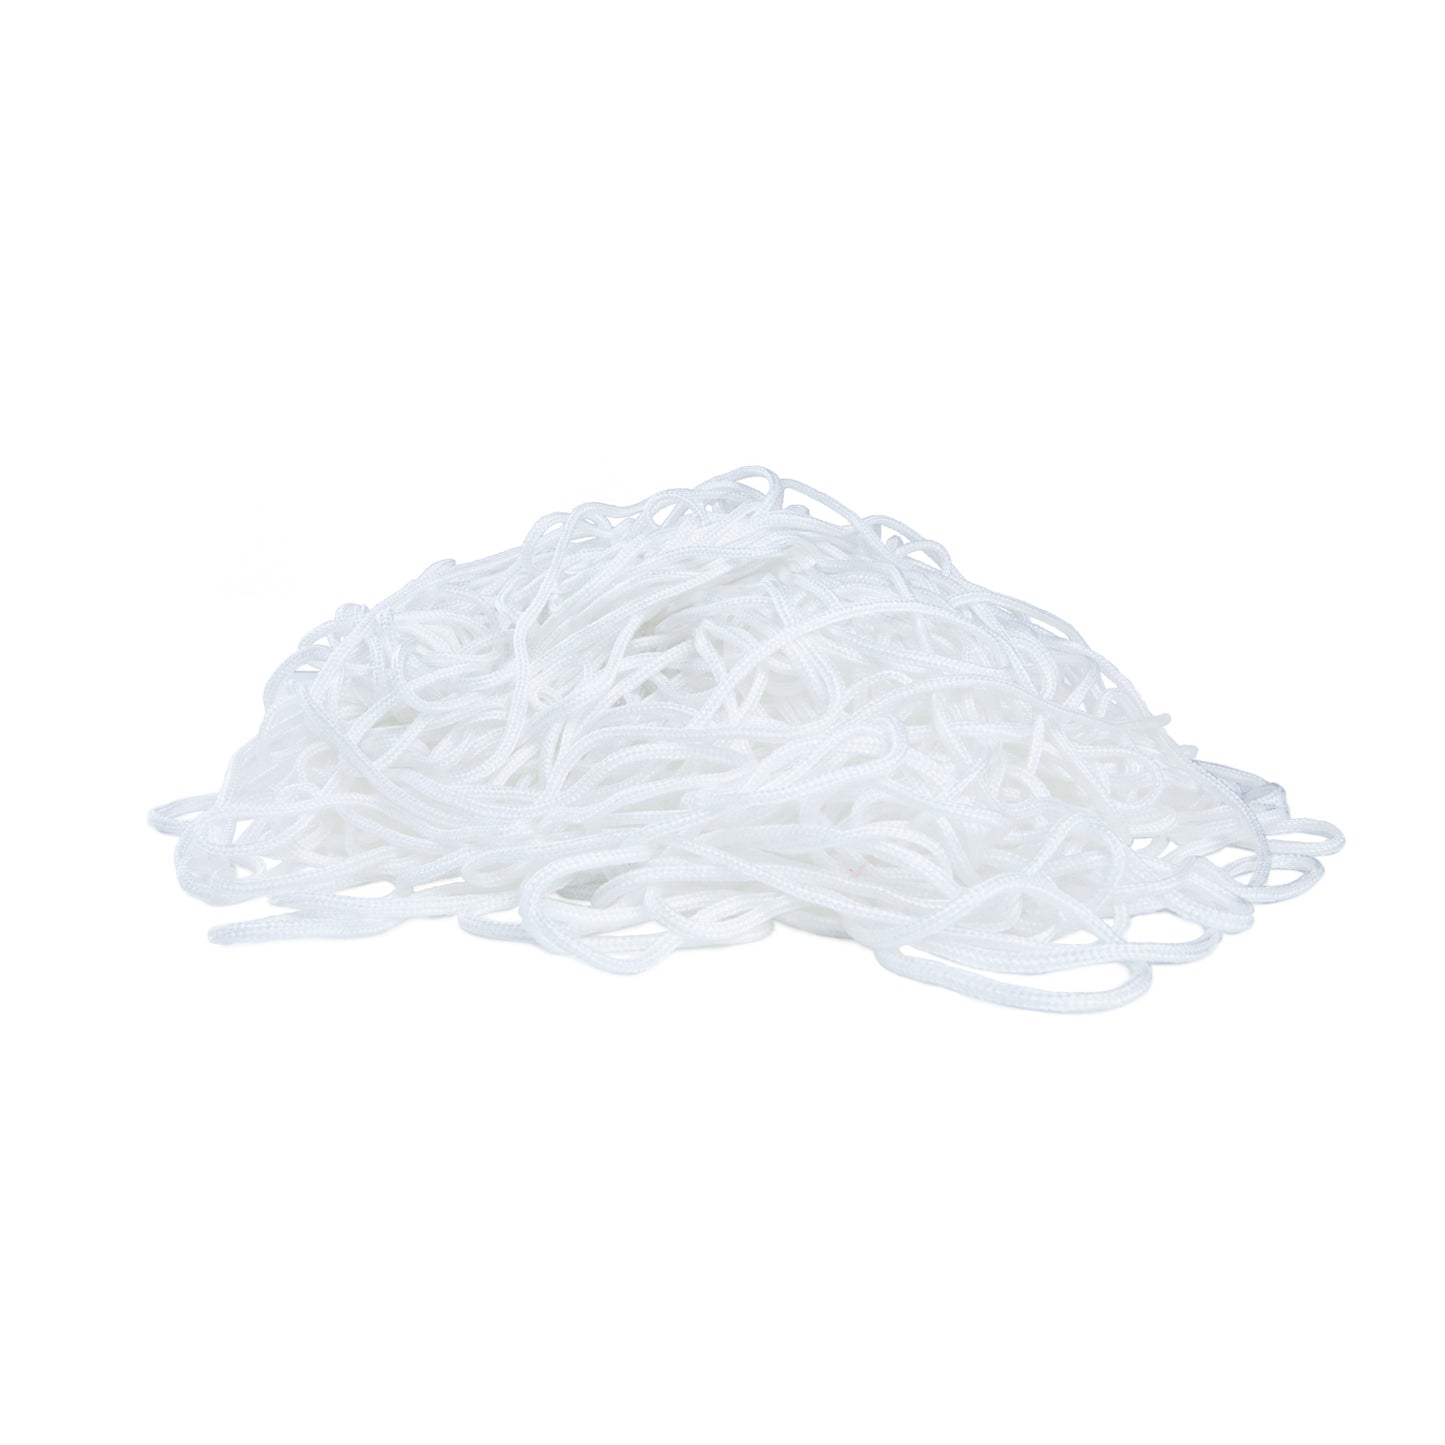 Replacement Part, Draw Cord, White (1500 Yard Per Box) for Laundry Bags